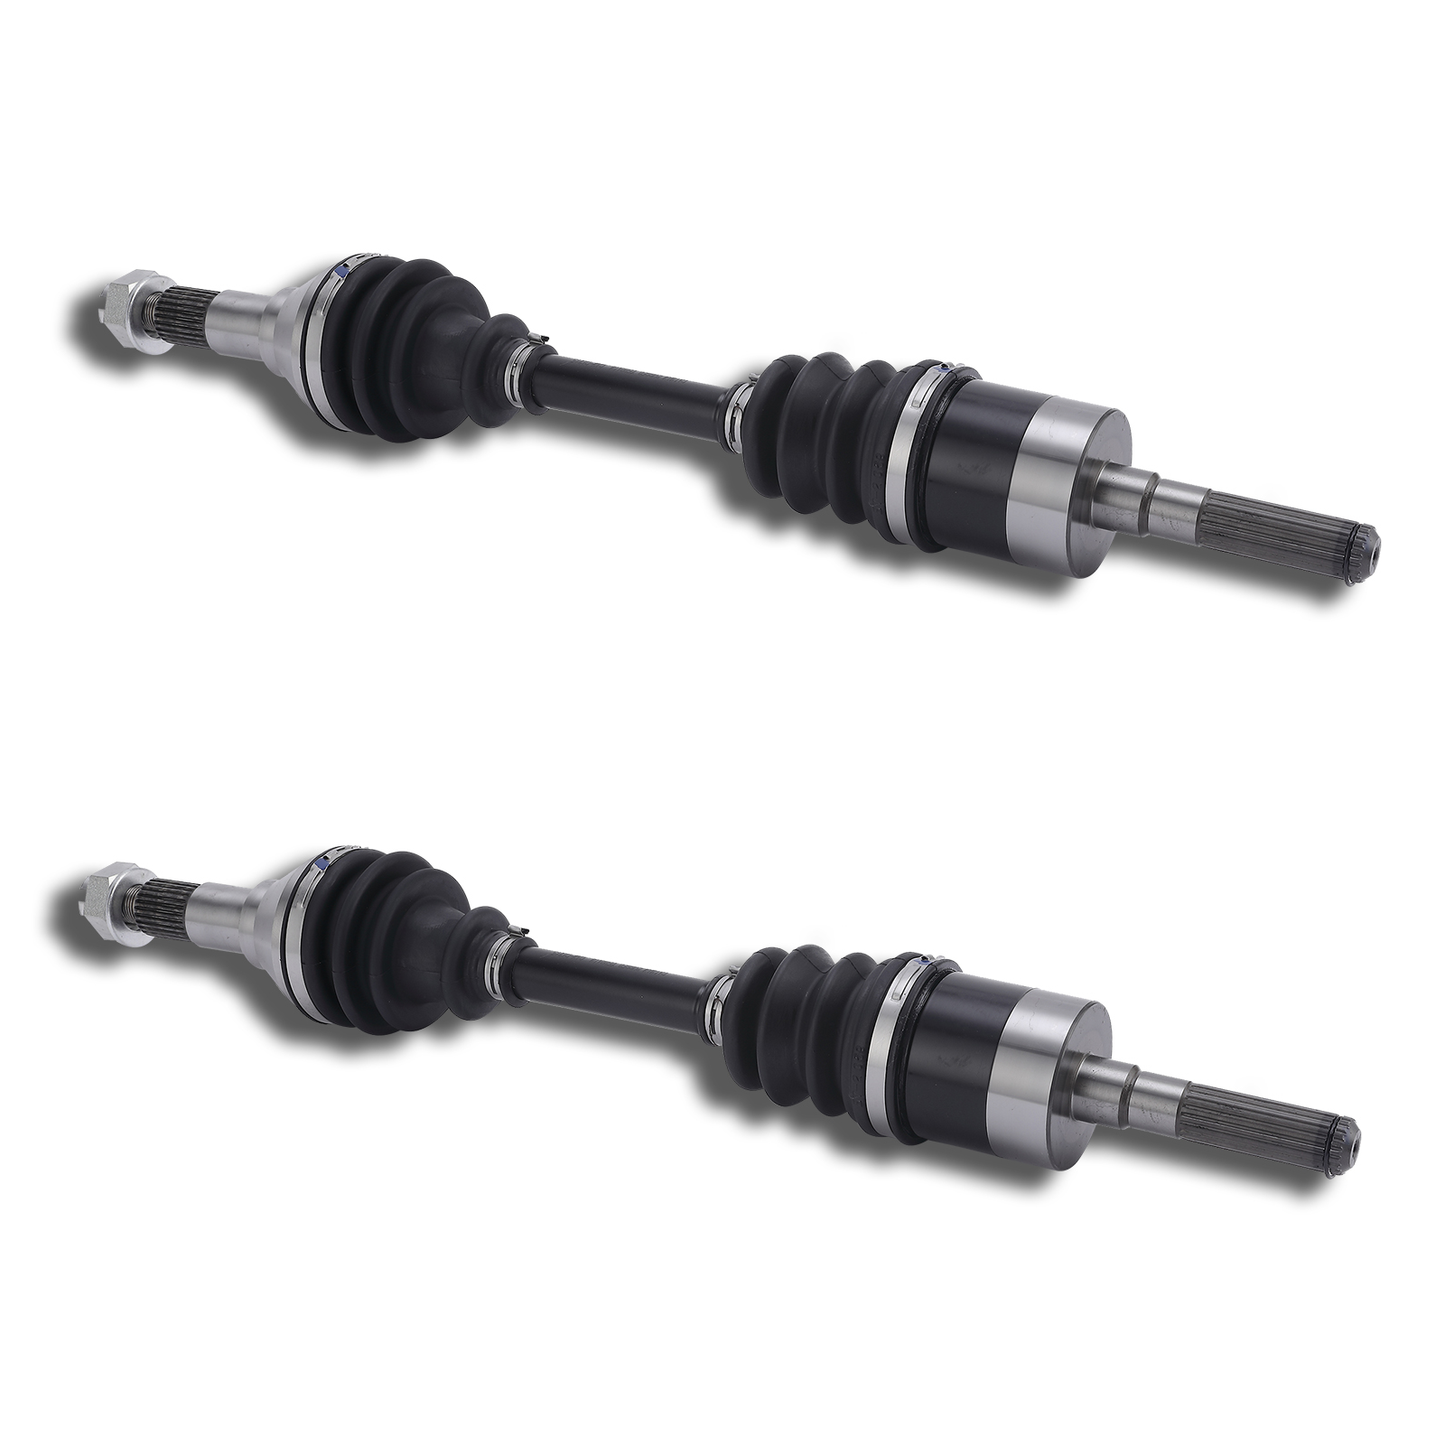 1 CAM-CA115 and 1 CAM-CA-215 Front Left Drive Shaft CV Axle for 2014-2013 OUTLANDER 500 705401115,705401943